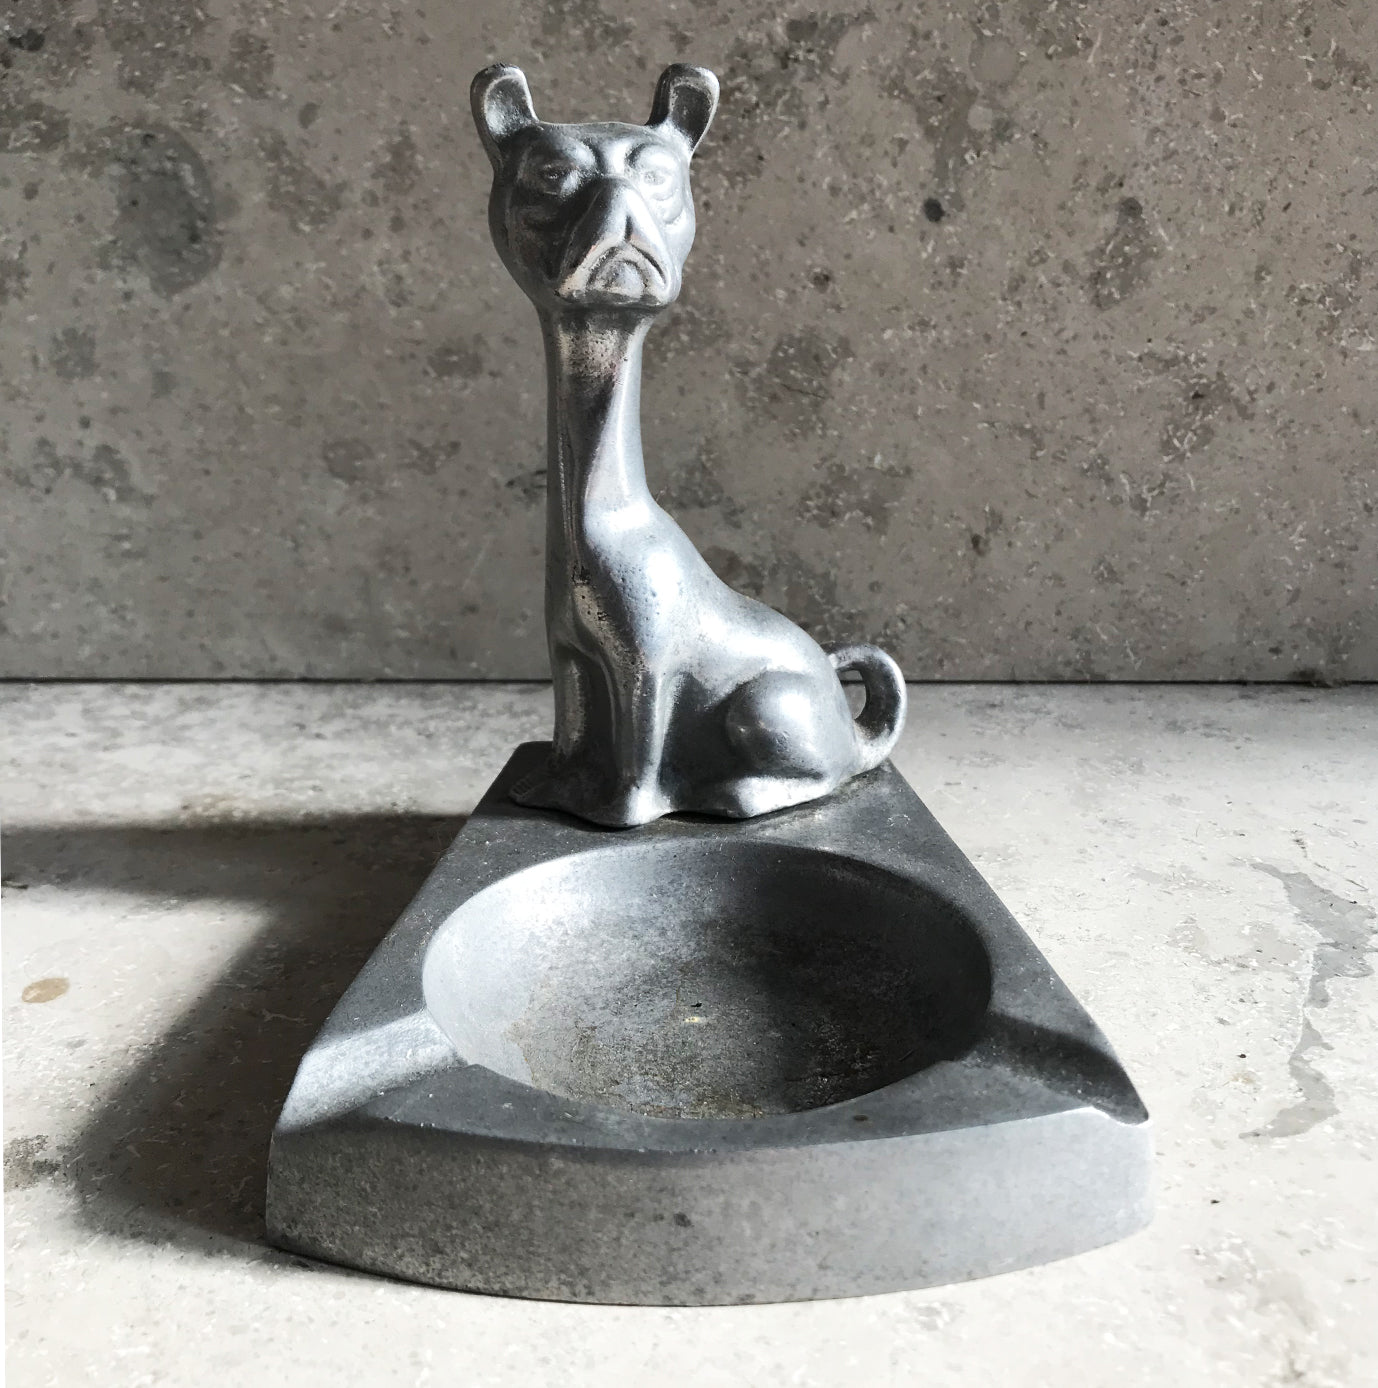 Cool vintage French Bulldog ashtray, probably from the 30's/40's. The pooch sits upright and proud on the edge of the bowl - SHOP NOW- www.intovintage.co.uk